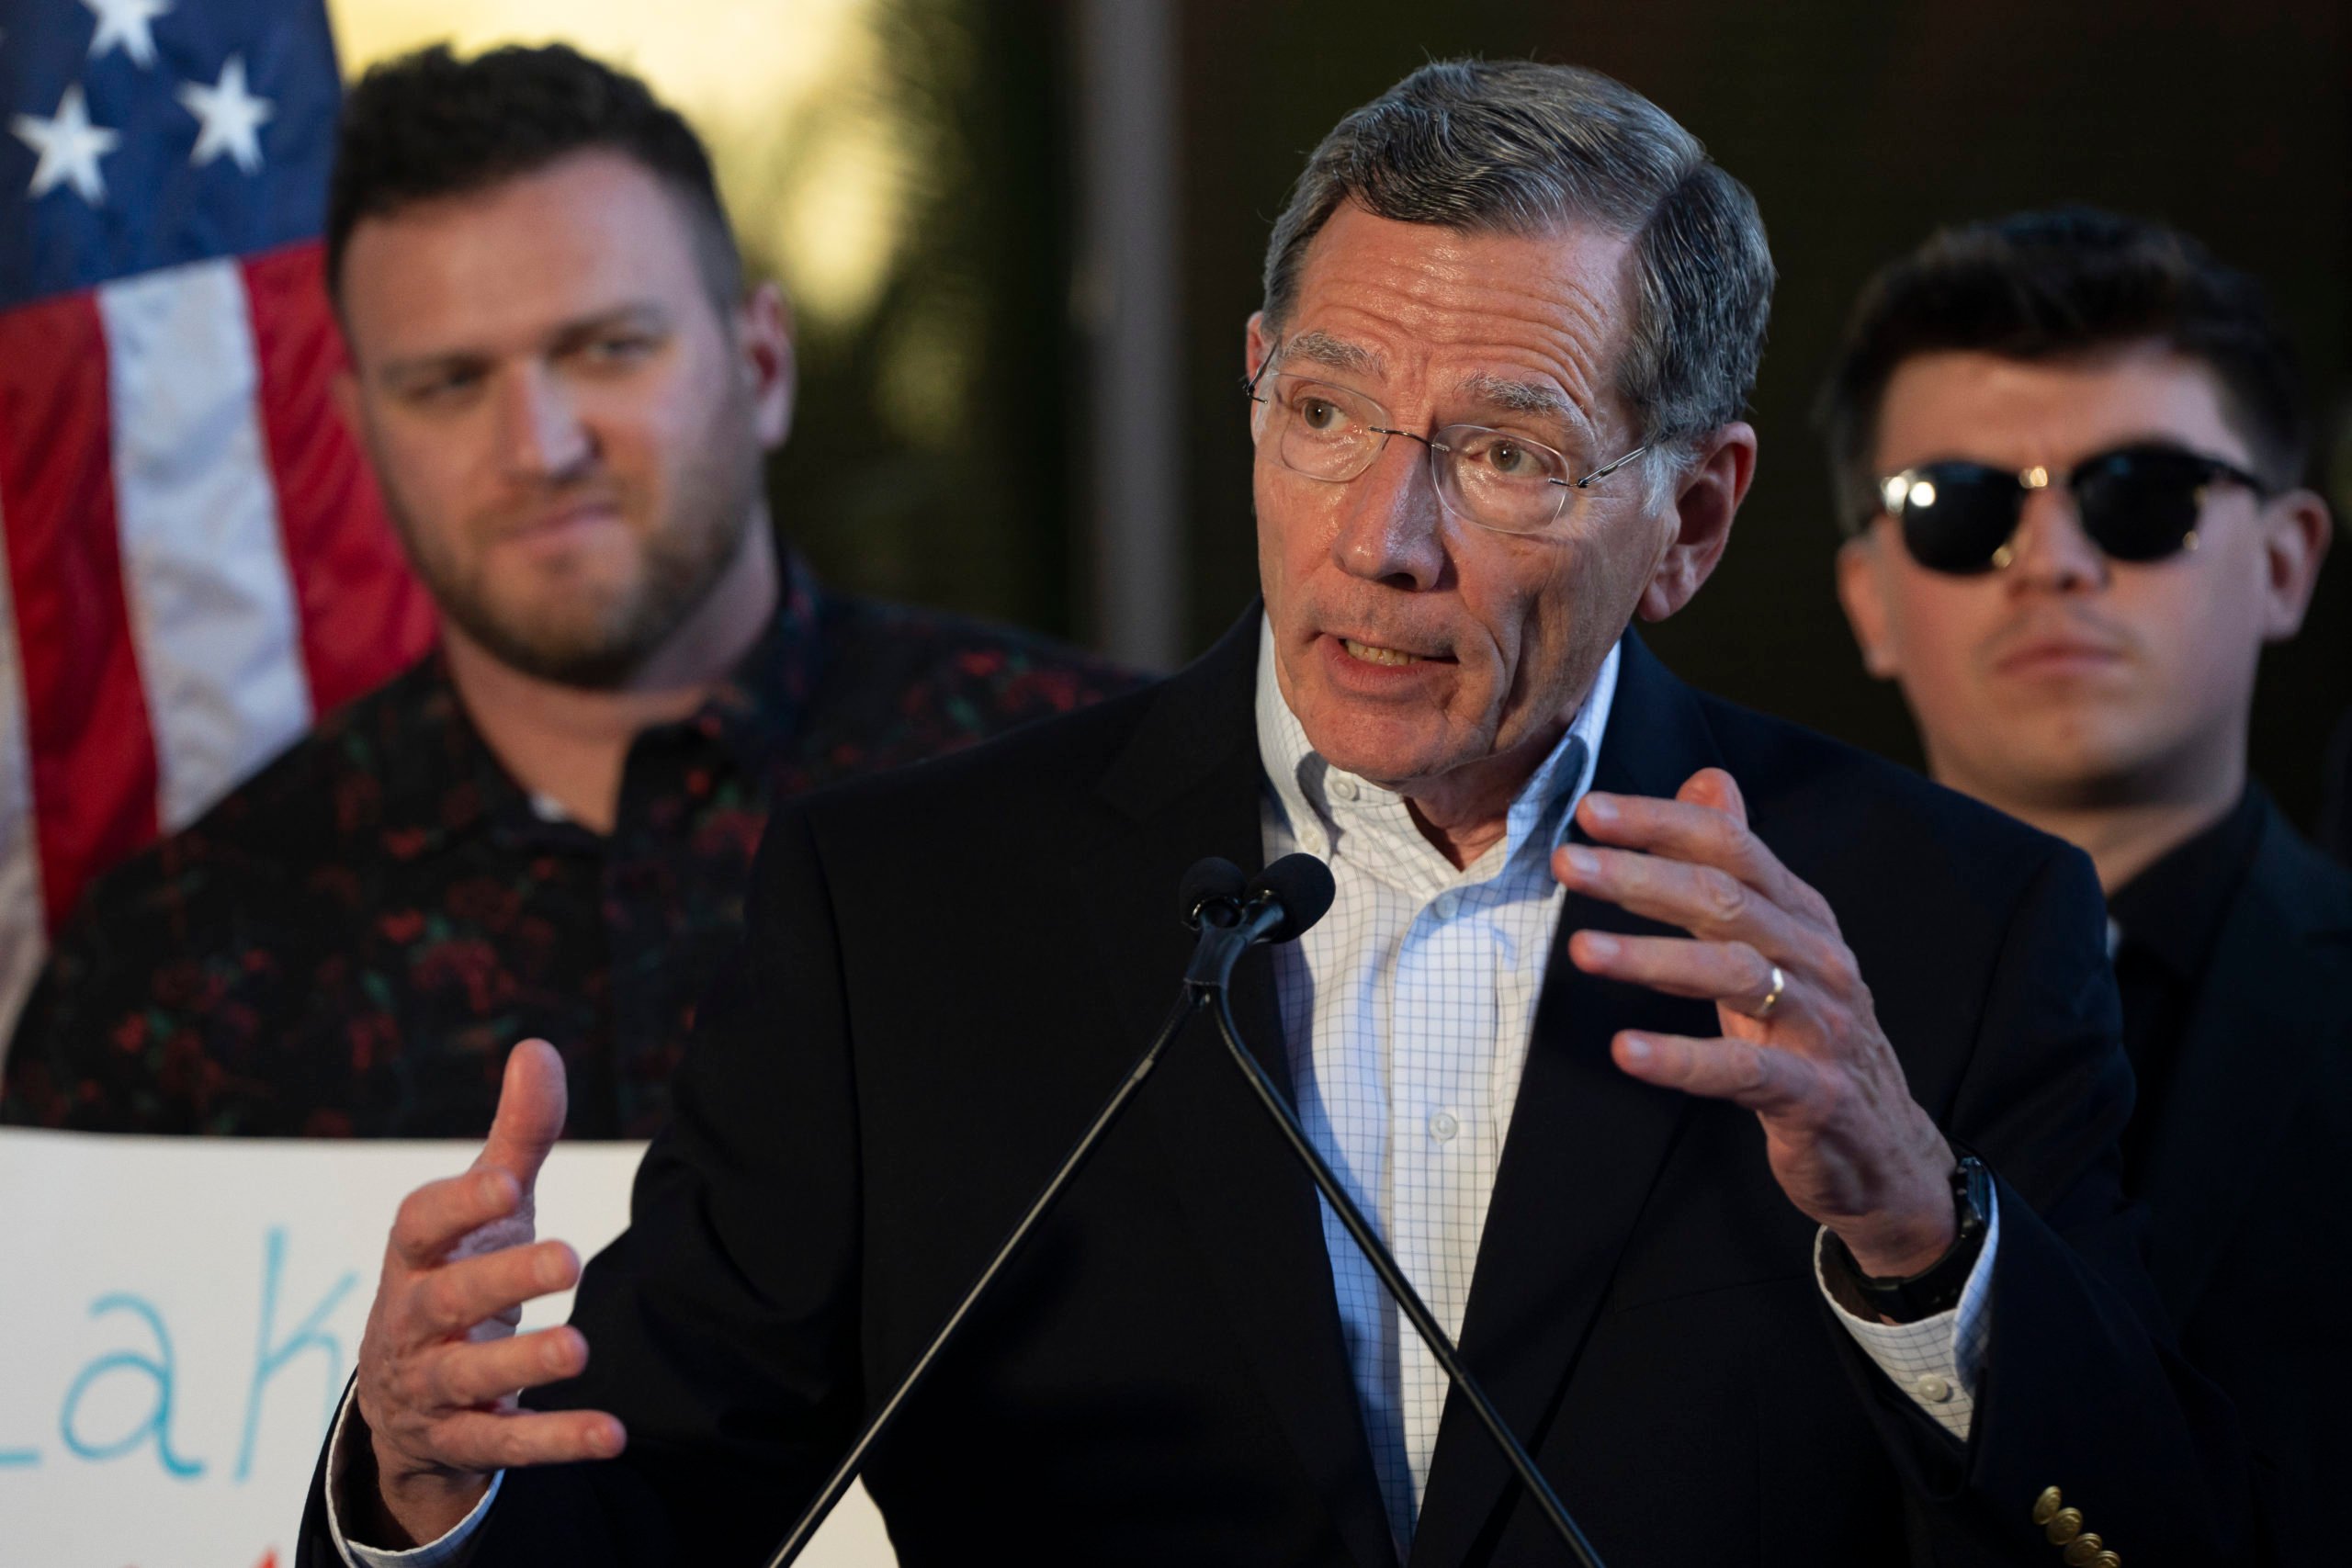 PHOENIX, ARIZONA - FEBRUARY 29: U.S. Sen. John Barrasso (R-WY) speaks during a news conference with Arizona Republican U.S. Senate candidate and far-right election denier Kari Lake on February 29, 2024 in Phoenix, Arizona. Barrasso is one of the senators being discussed as a possible successor to Minority Leader Mitch McConnell, who announced he would be stepping down in that role in January. (Photo by Rebecca Noble/Getty Images)